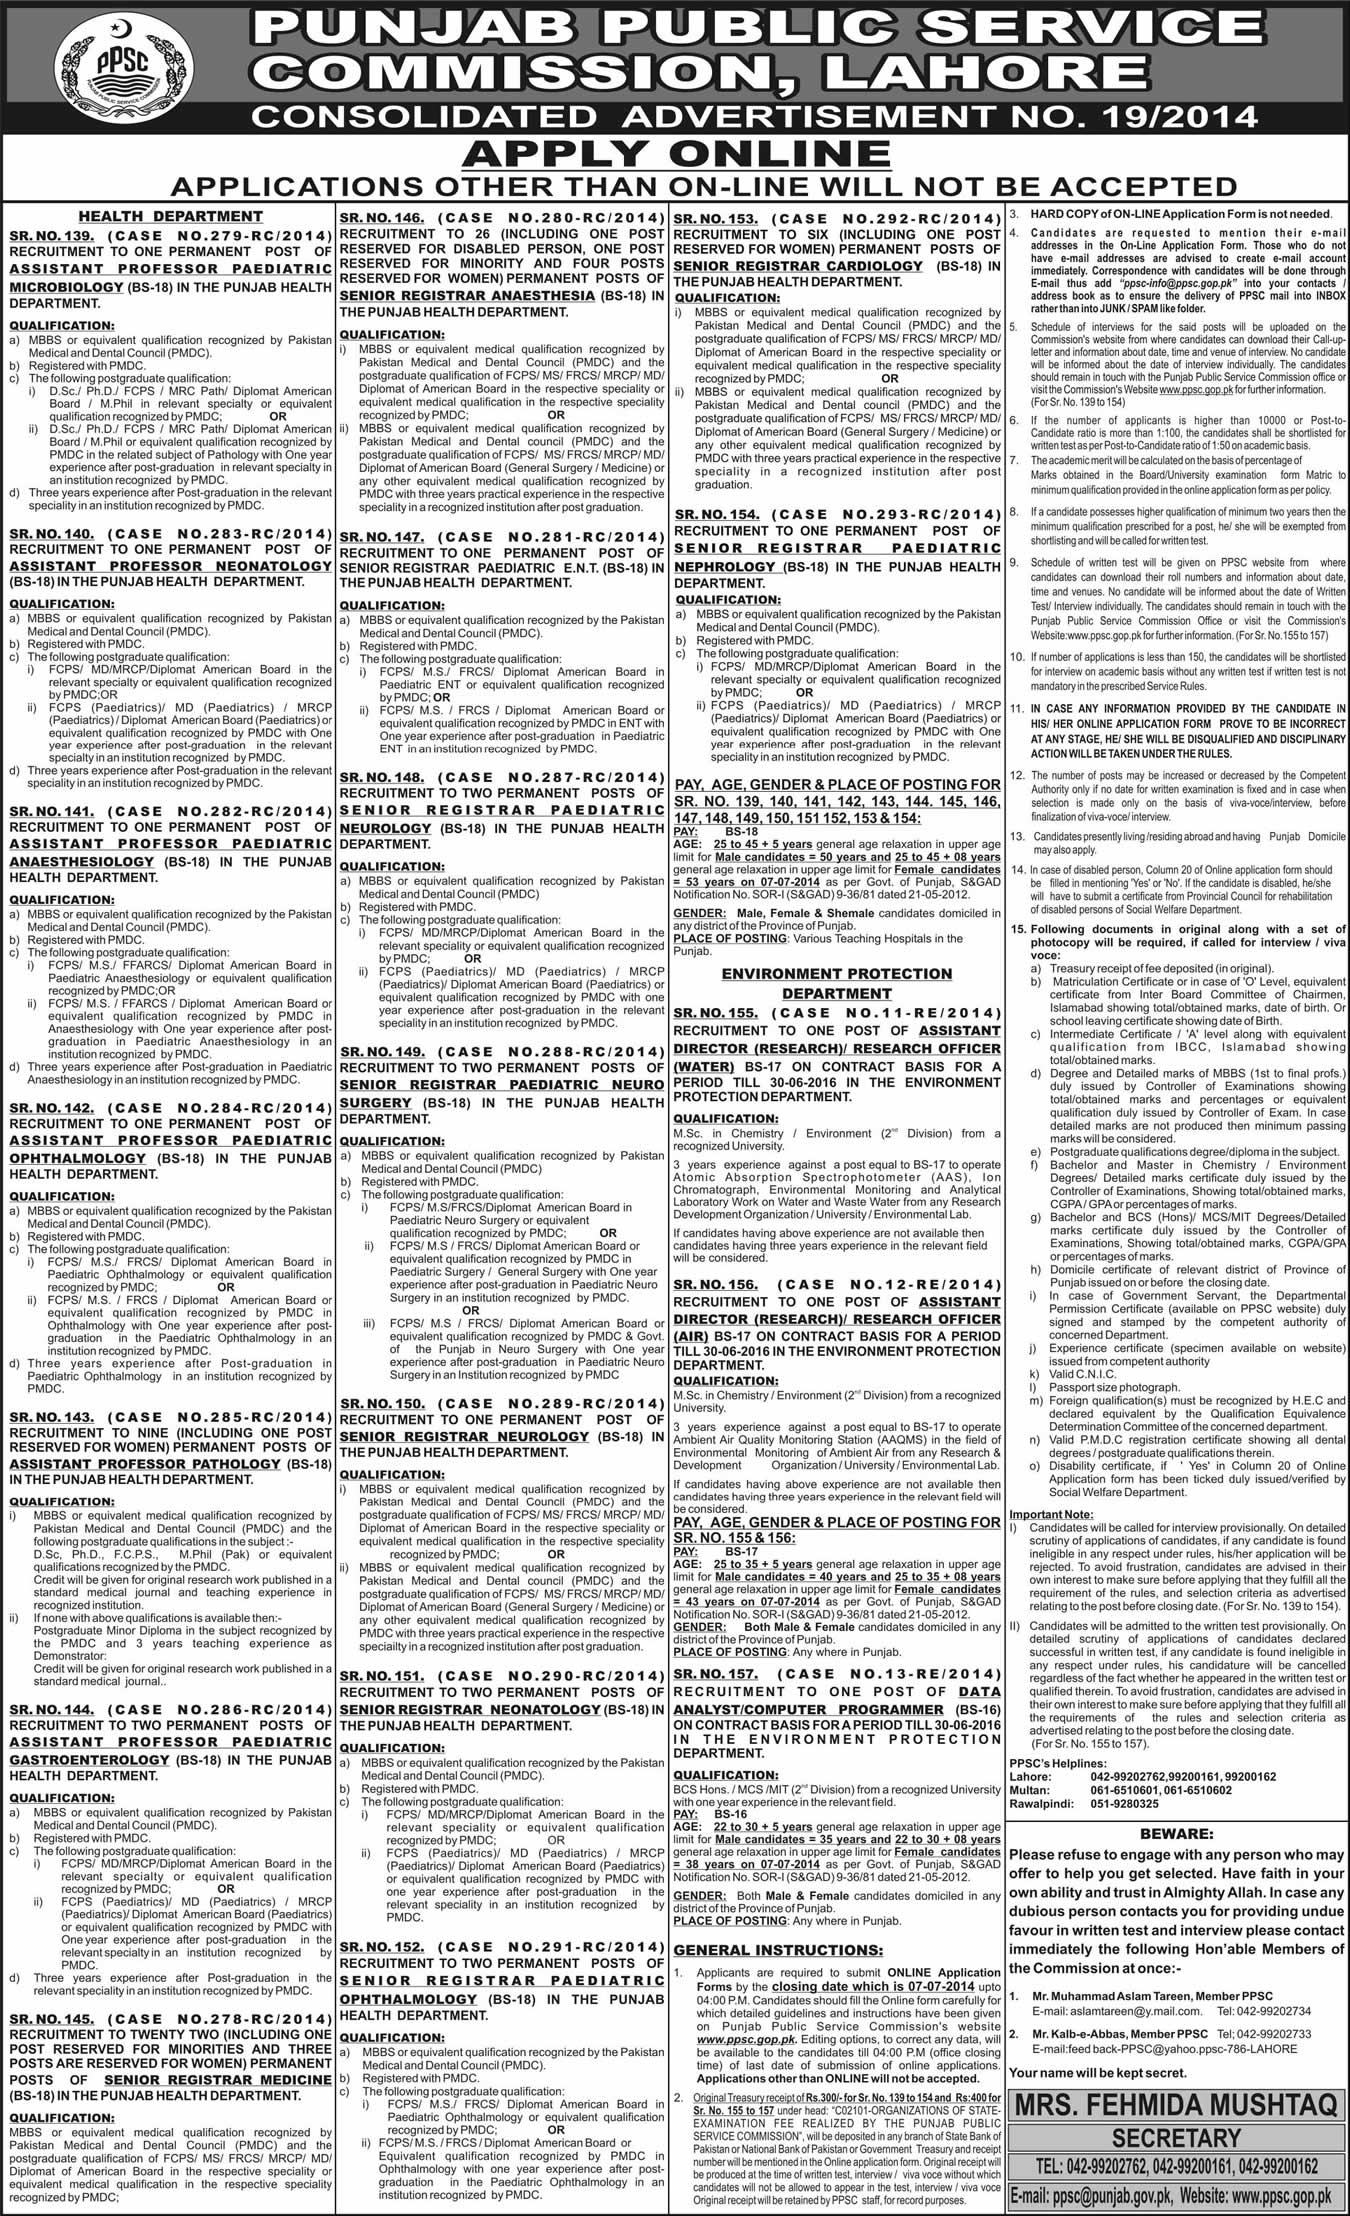 PPSC Jobs June 2014 Consolidated Advertisement No 19/2014